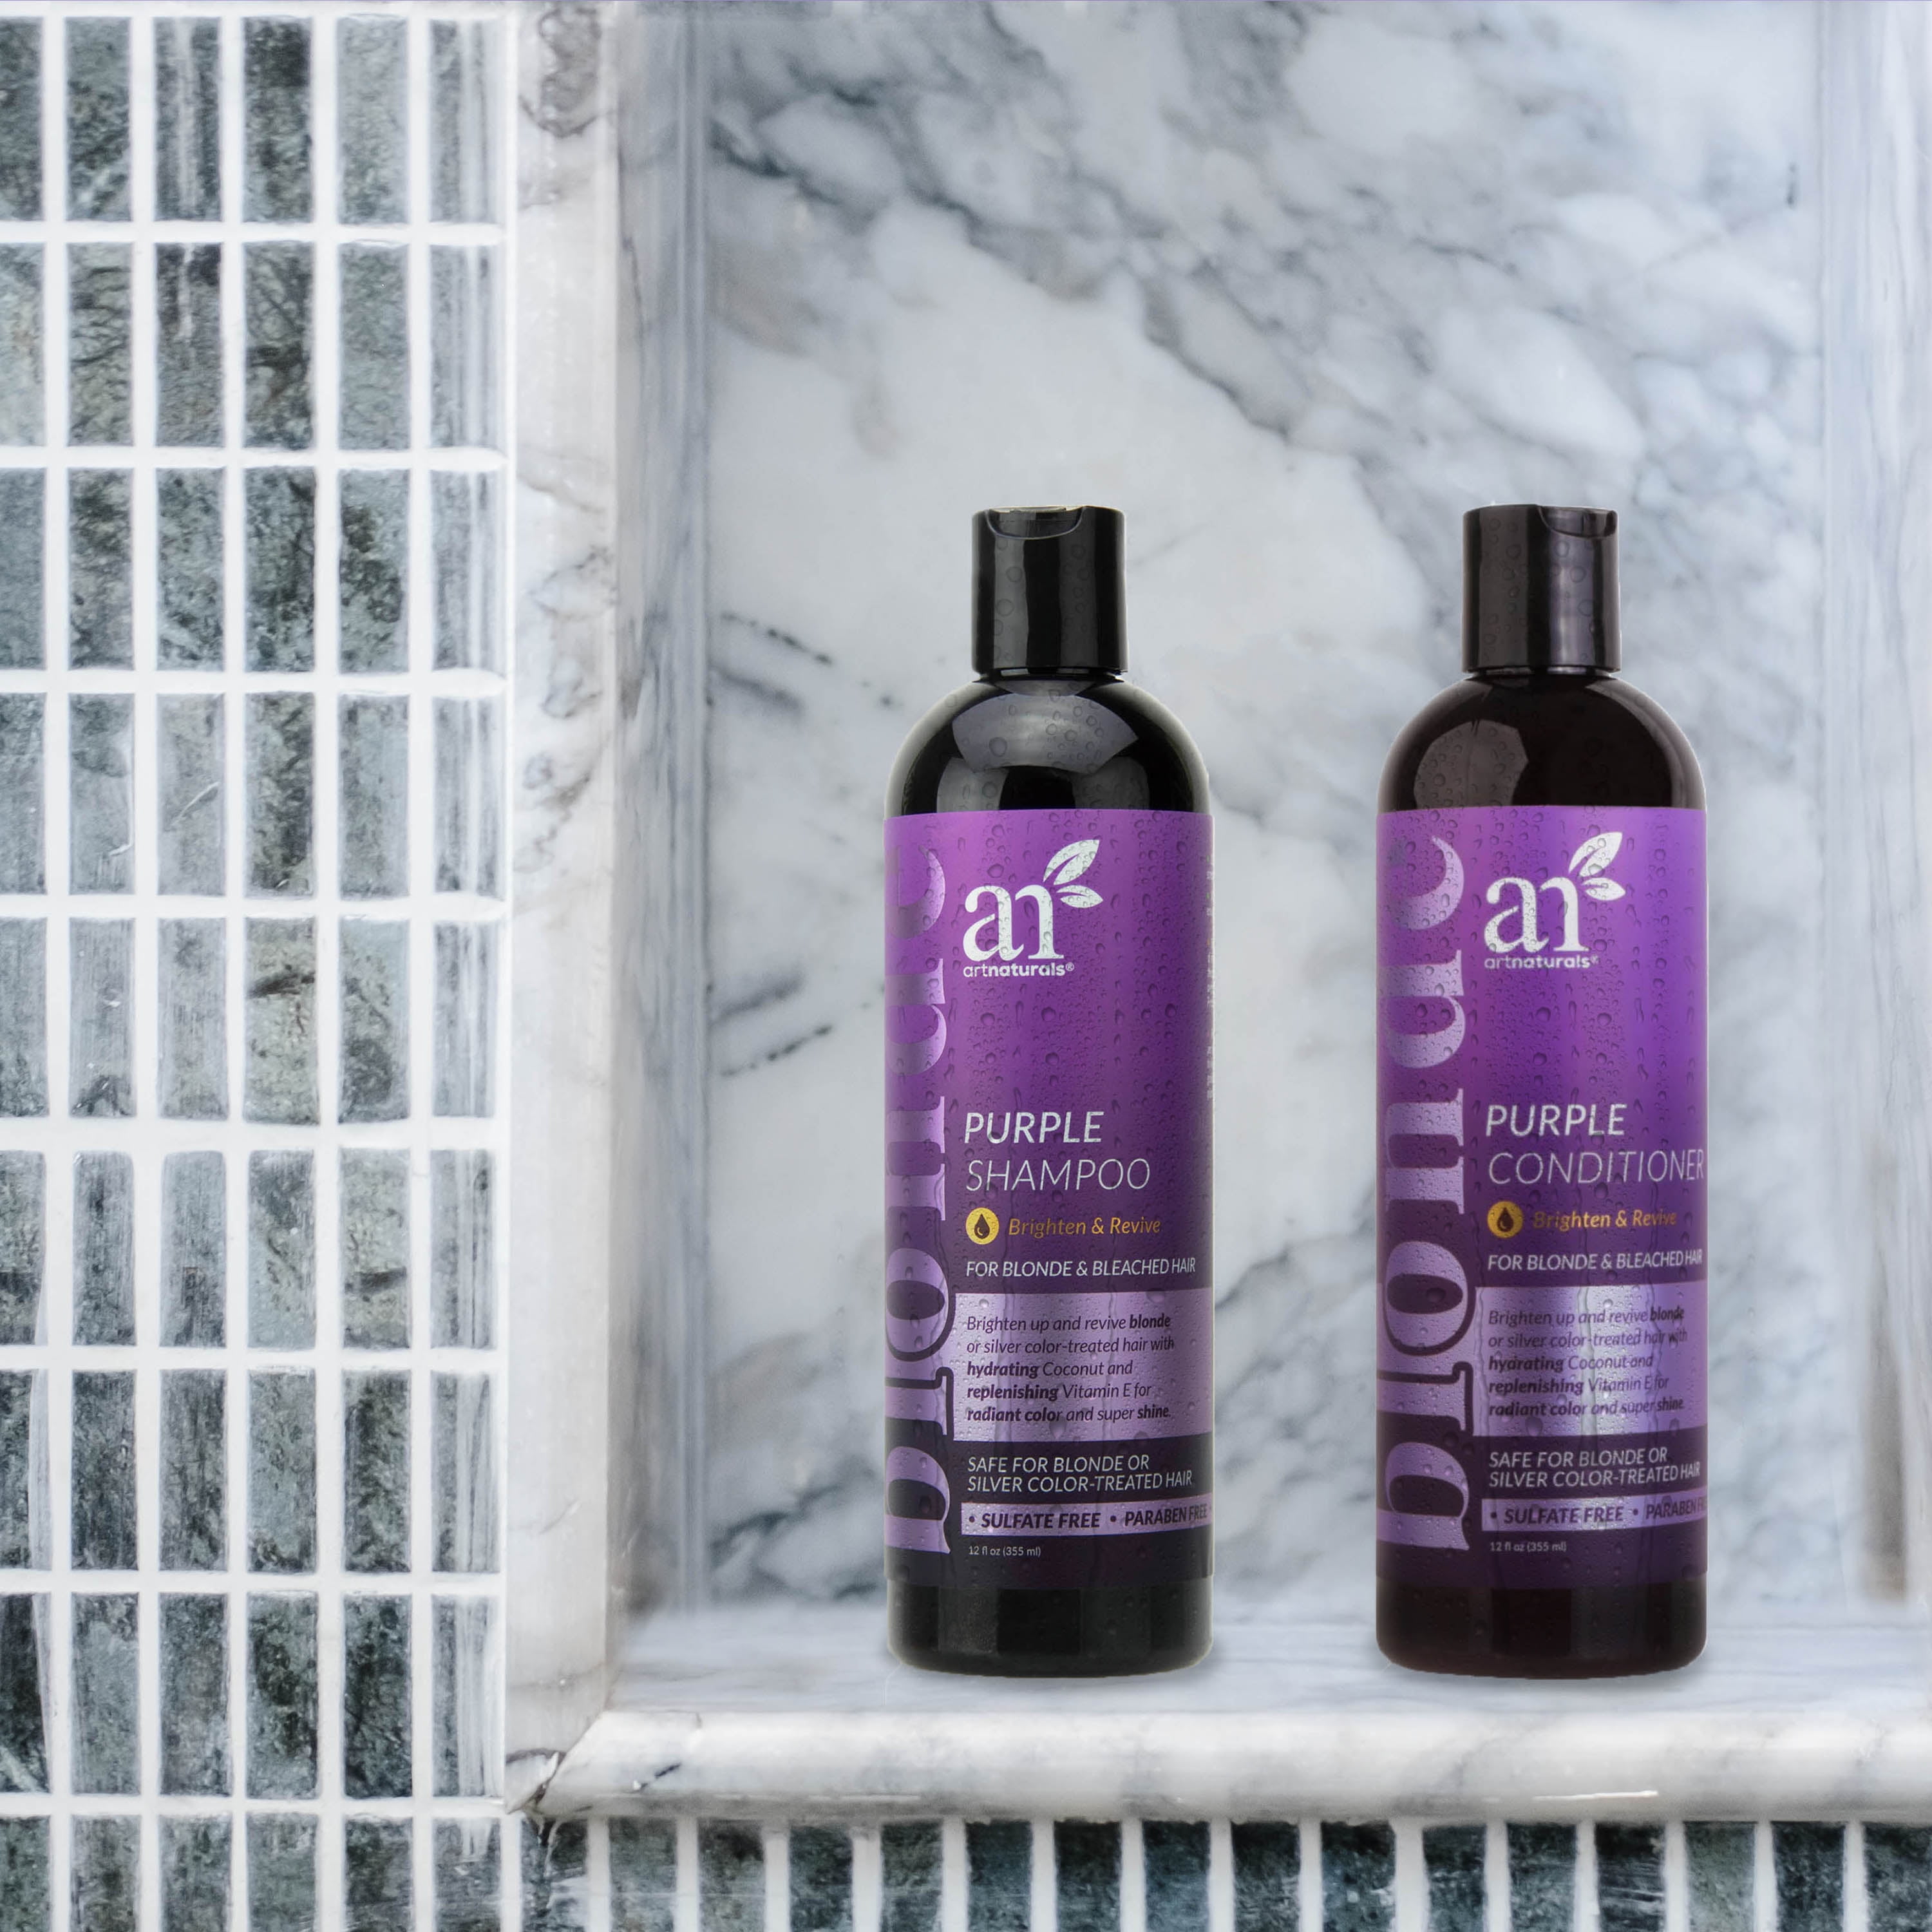 artnaturals Purple Shampoo and Conditioner Set – (2 x 16 Fl Oz / 473ml) –  Protects, Balances and Tones – Bleached, Color Treated, Silver, Brassy and